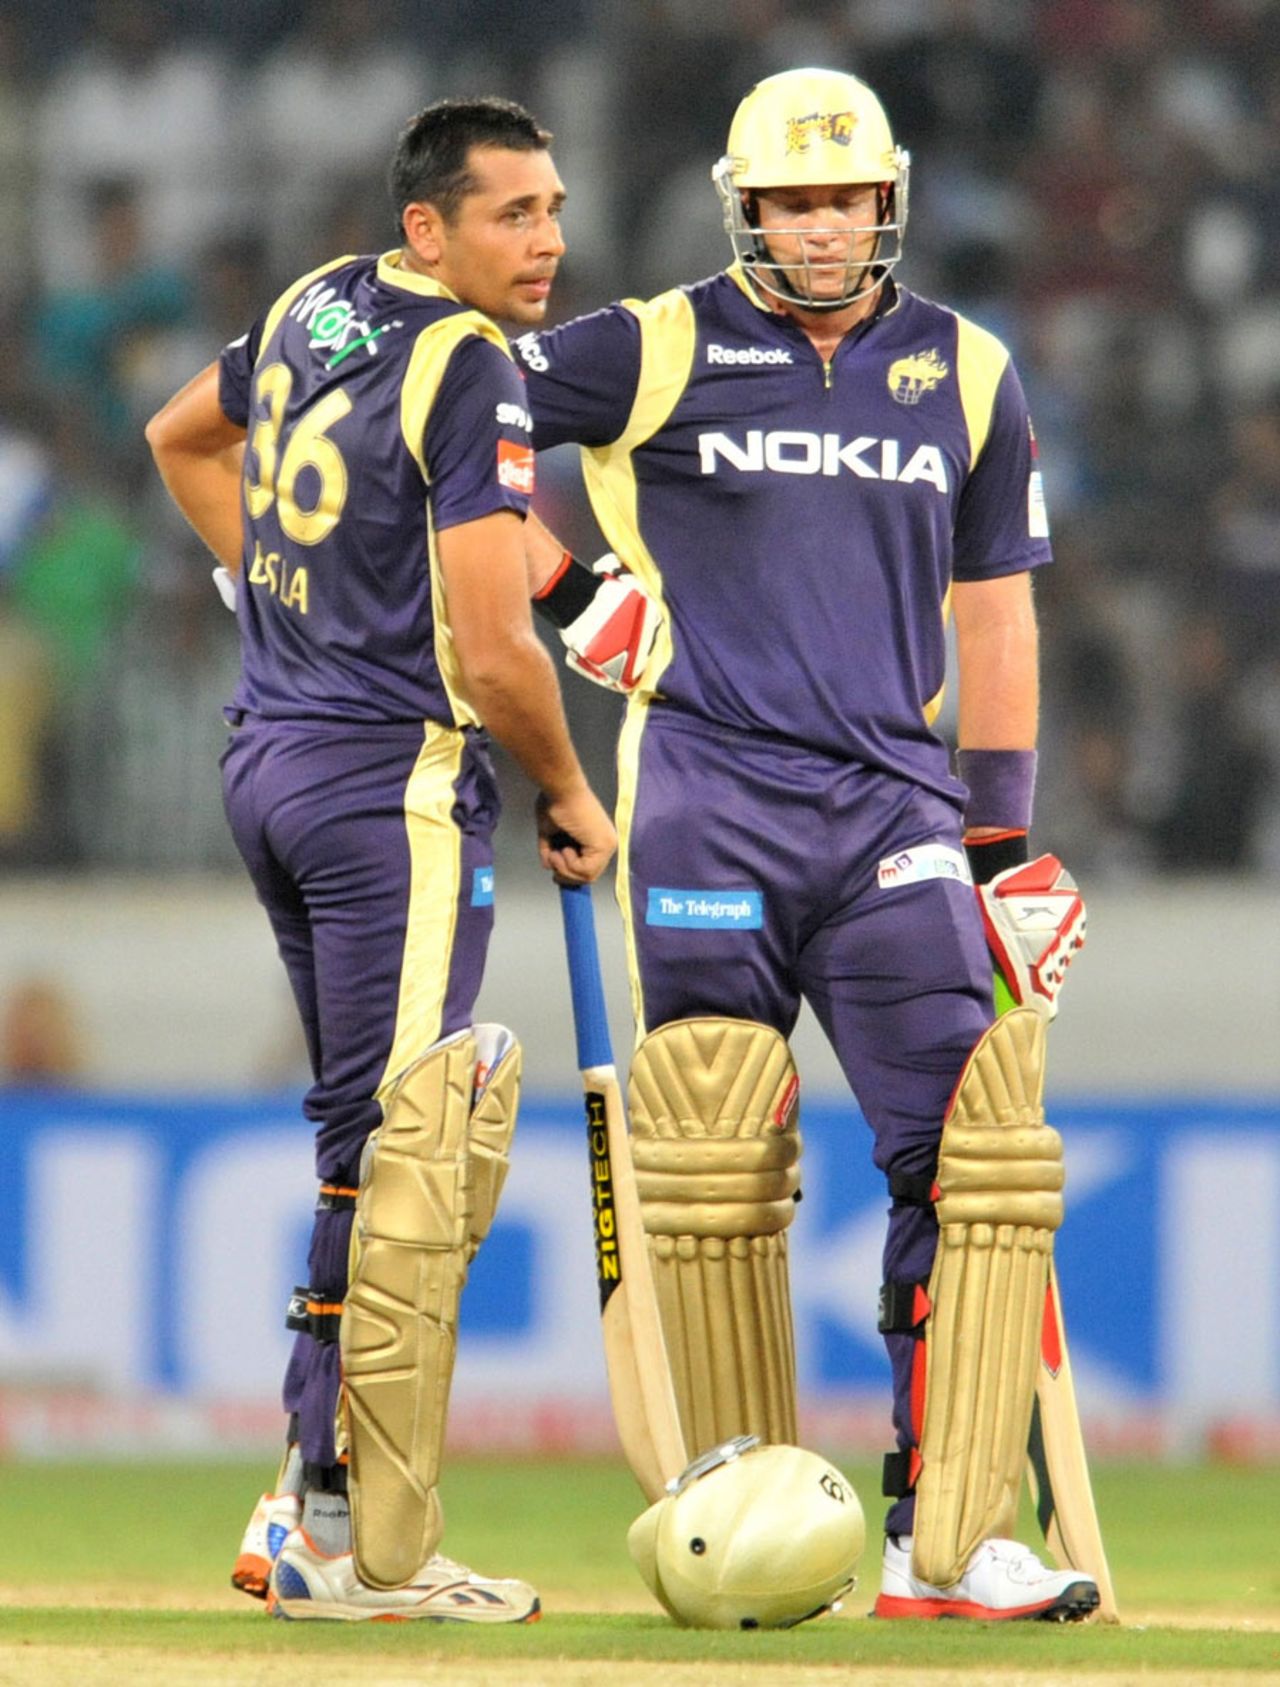 Kolkata Knight Riders openers Manvinder Bisla and Jacques Kallis put on 73 by the 10th over, Auckland v Kolkata Knight Riders, CLT20 qualifier, Hyderabad, September 19, 2011